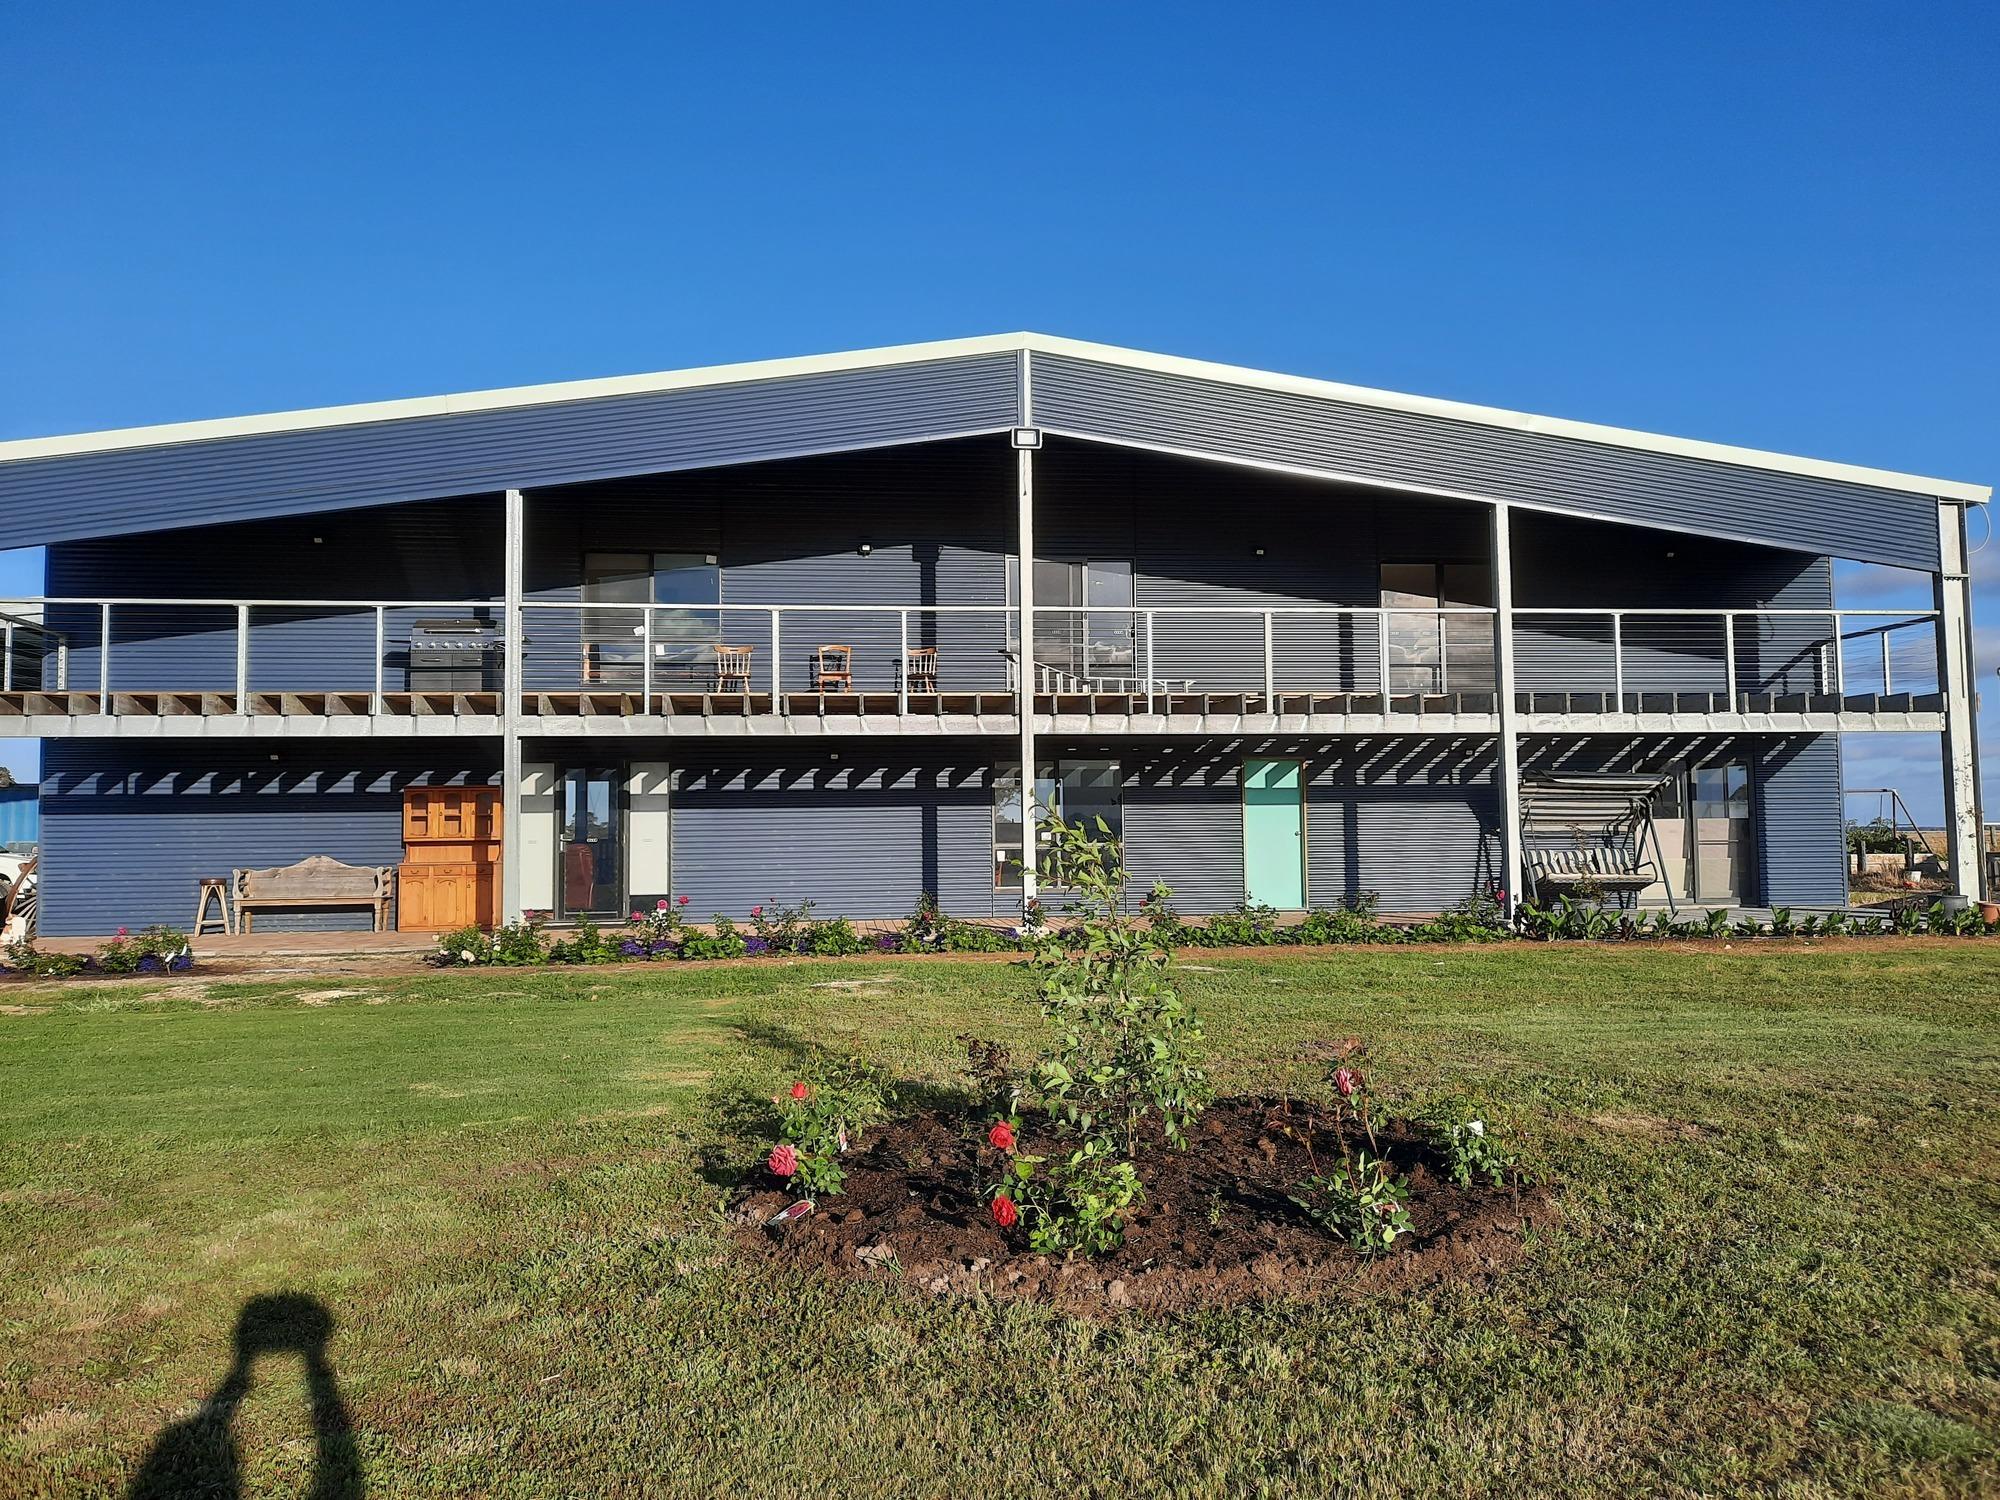 Benni from Tarpeena, SA loves COLORBOND® steel. Guttering & Fascia, Walling, Patio & Pergola made from COLORBOND® steel in the colours Deep Ocean® and Surfmist® Matt